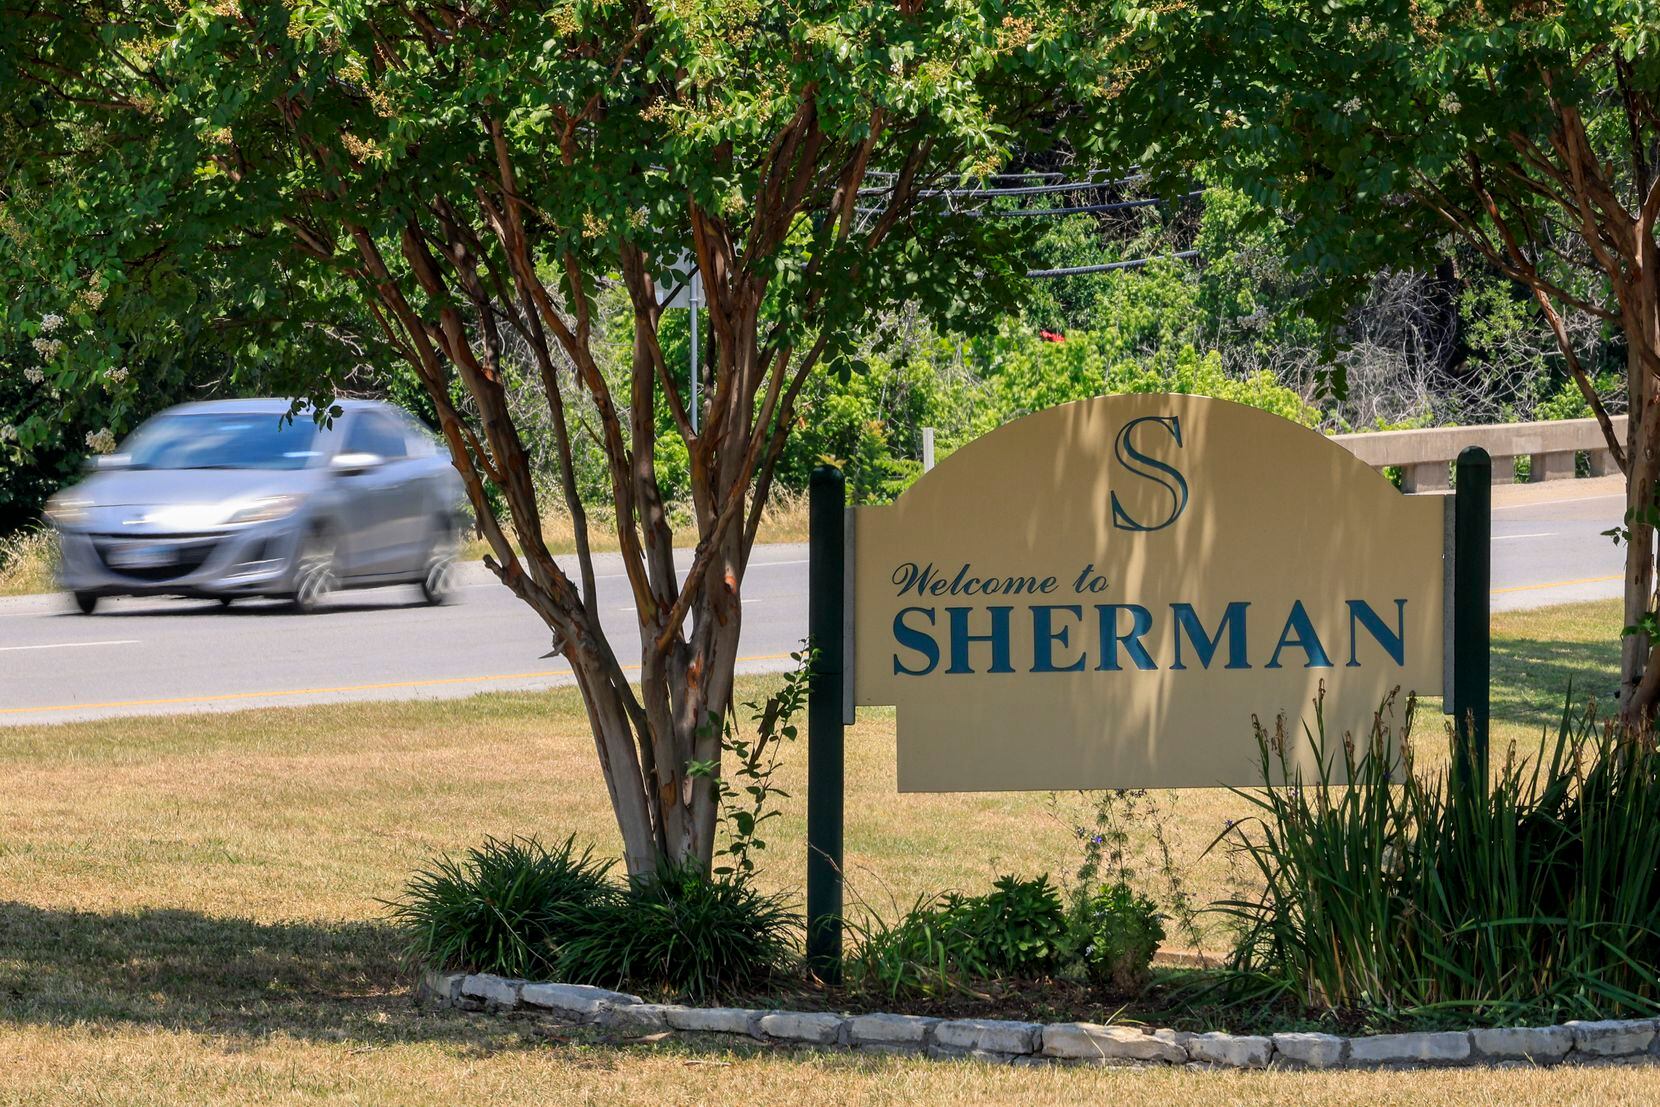 A welcoming sign to Sherman is an indication of what local leaders describe as a community...